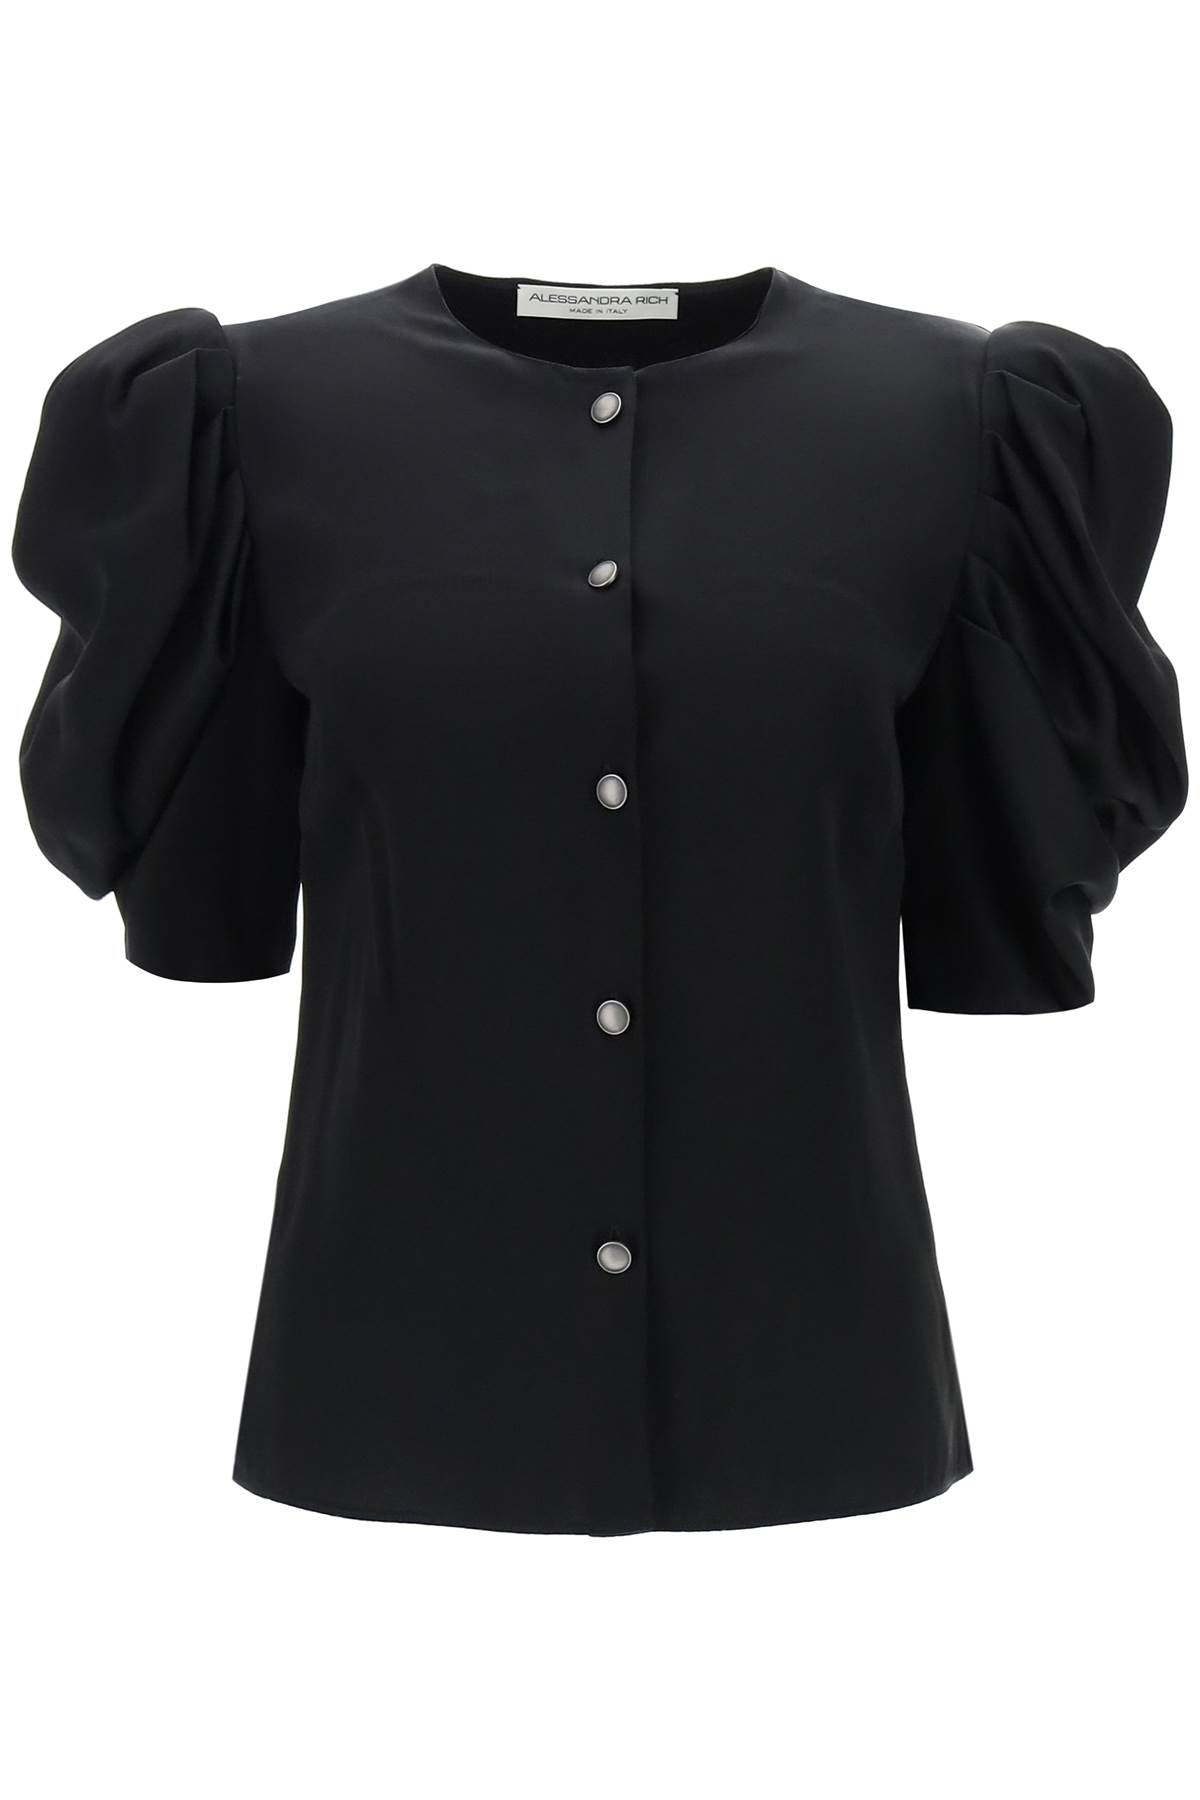 Alessandra rich envers satin blouse with bouffant sleeves-0